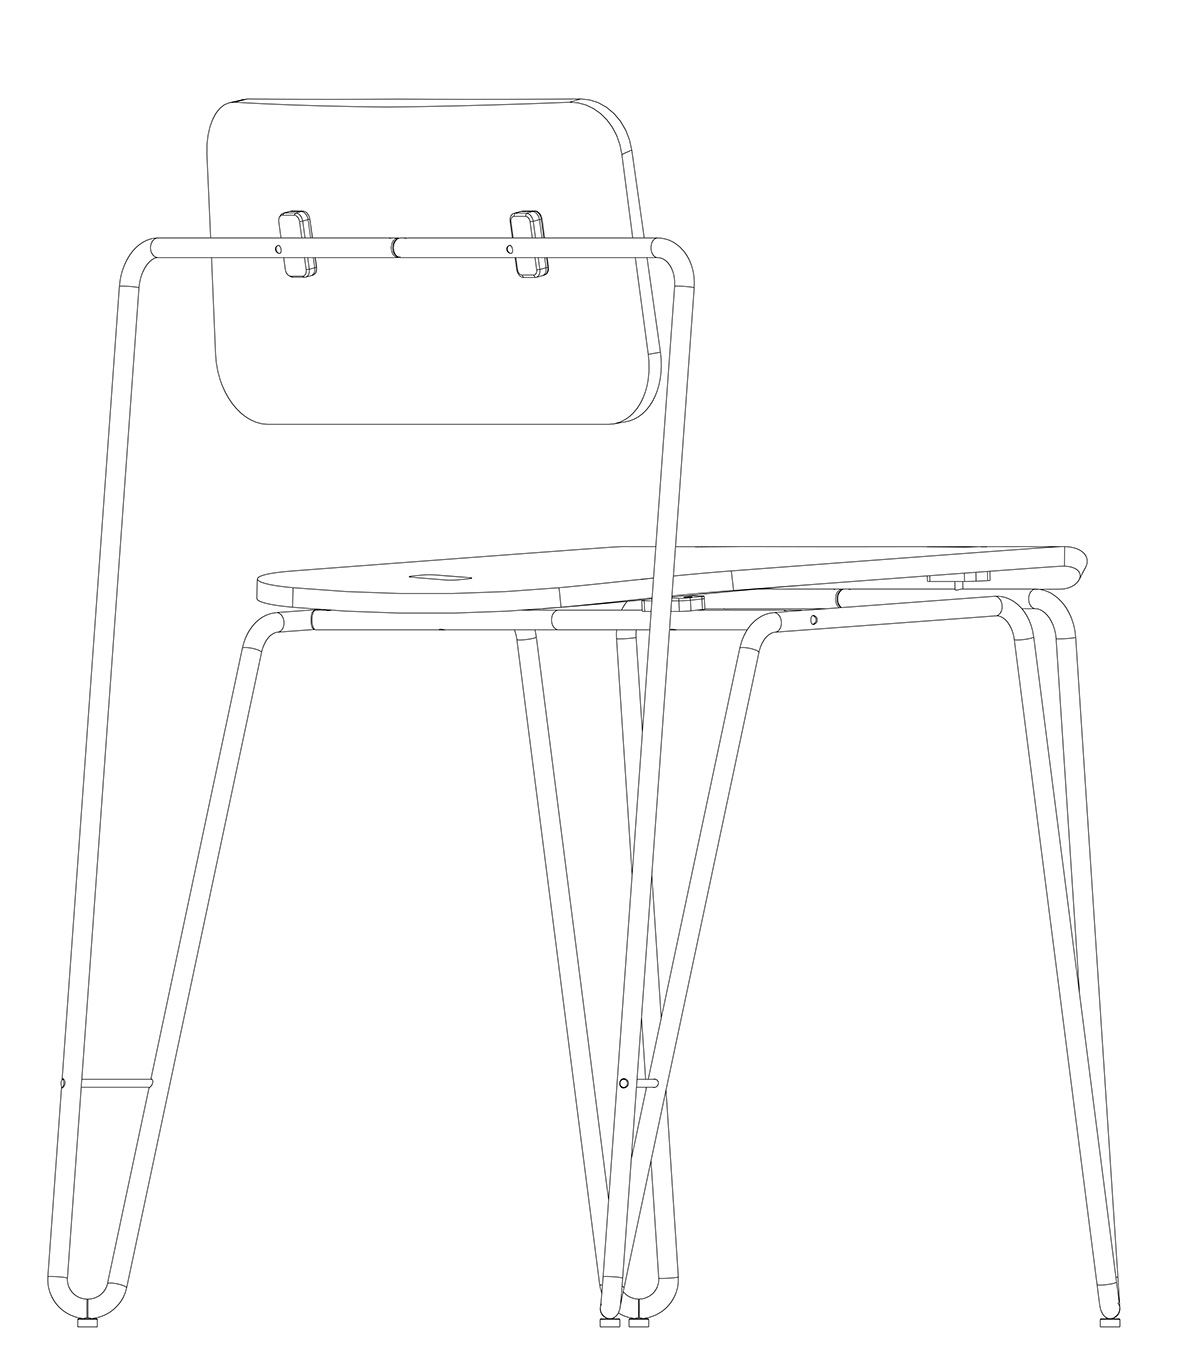 inprocess chair design iteration